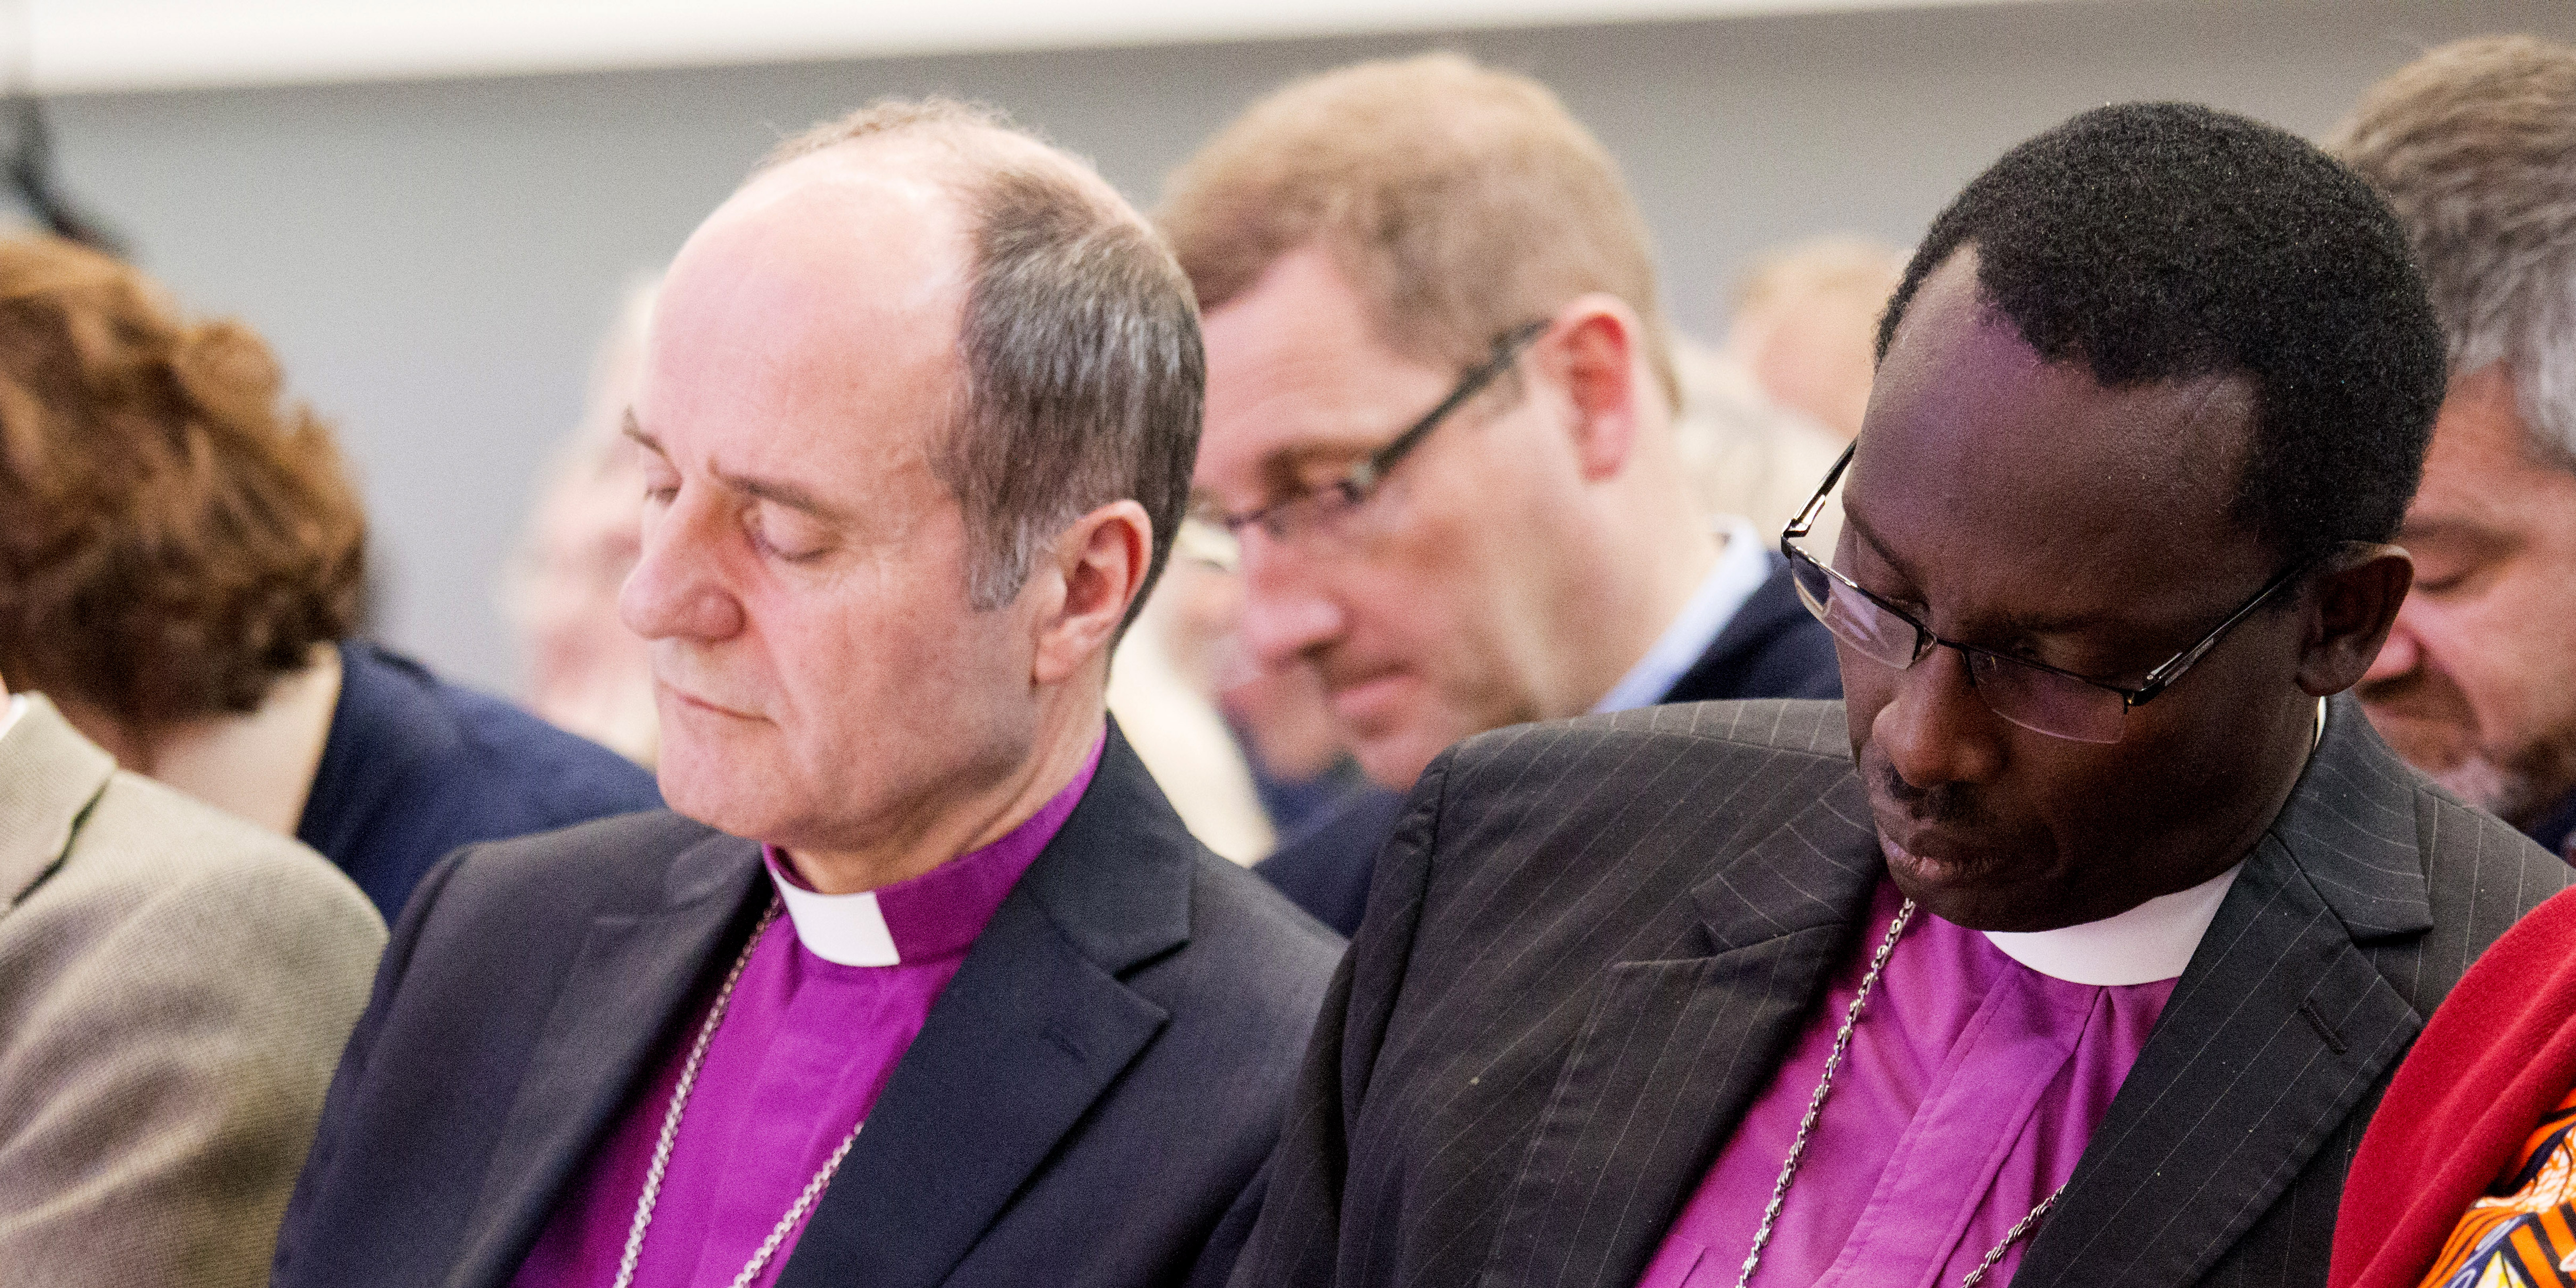 Open Continuing to talk of Jesus: Bishop Lee's Synod address